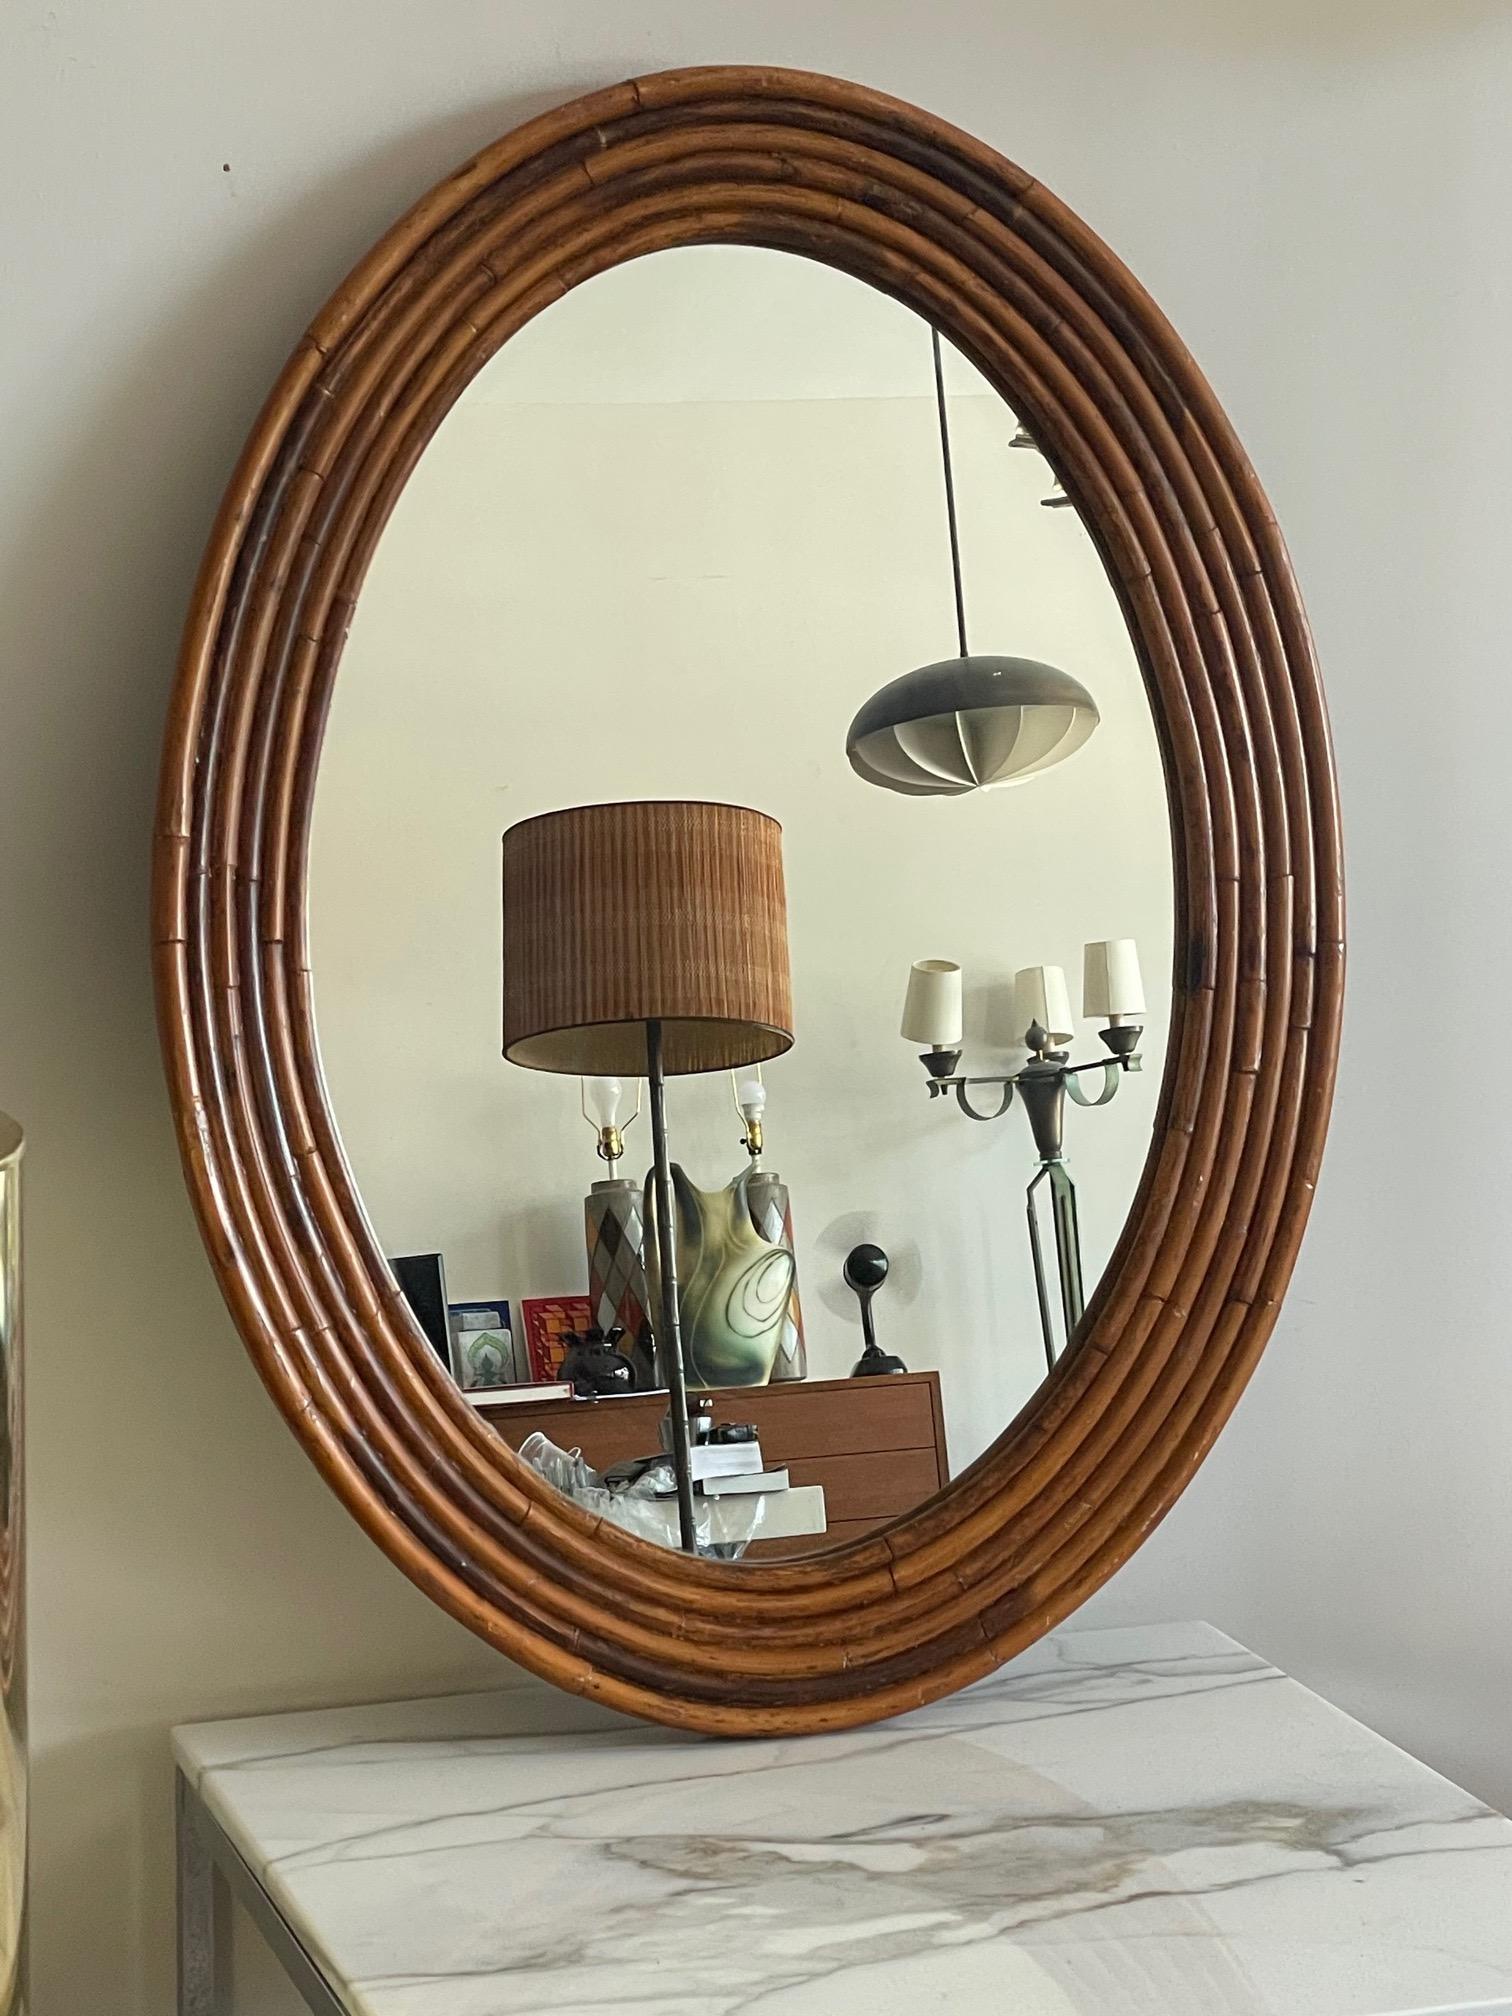 An unusual mirror made of six bands of rattan in front and three bands thick. Nice patina and character.